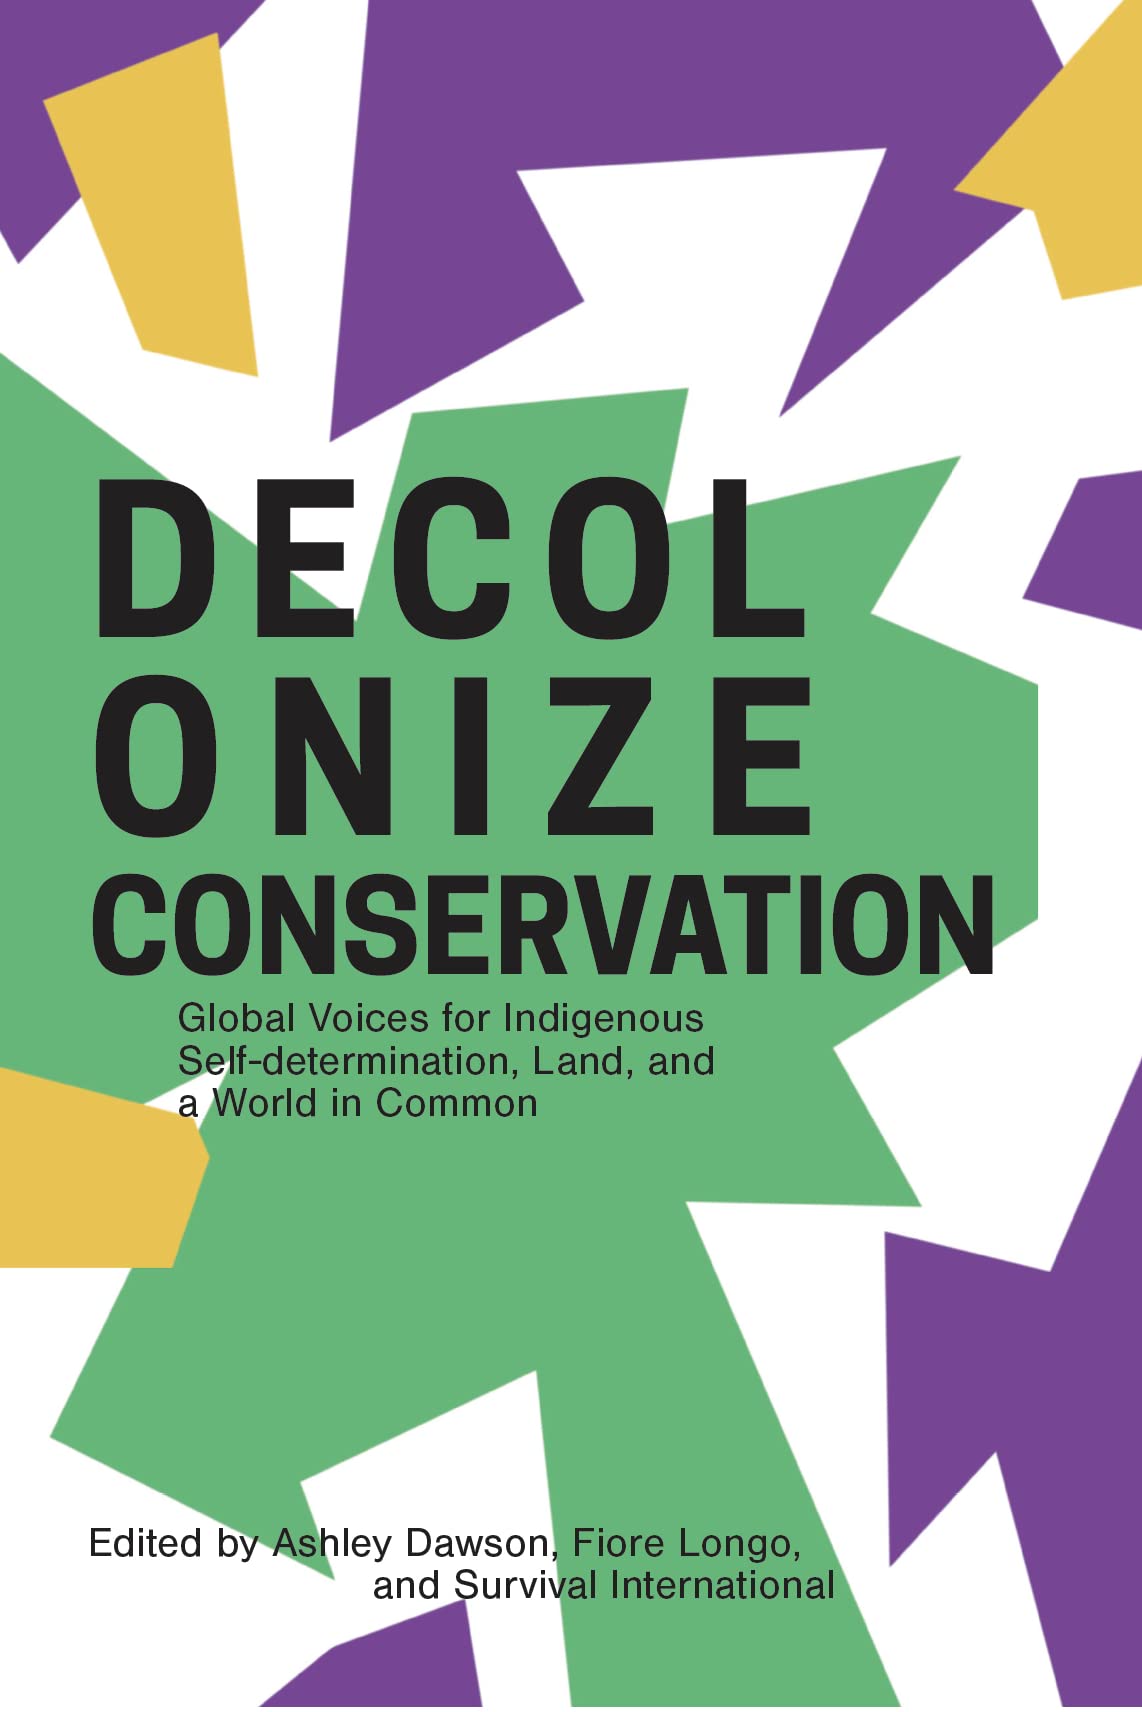 Decolonize Conservation: Global Voices for Indigenous Self-determination, Land, and a World in Common